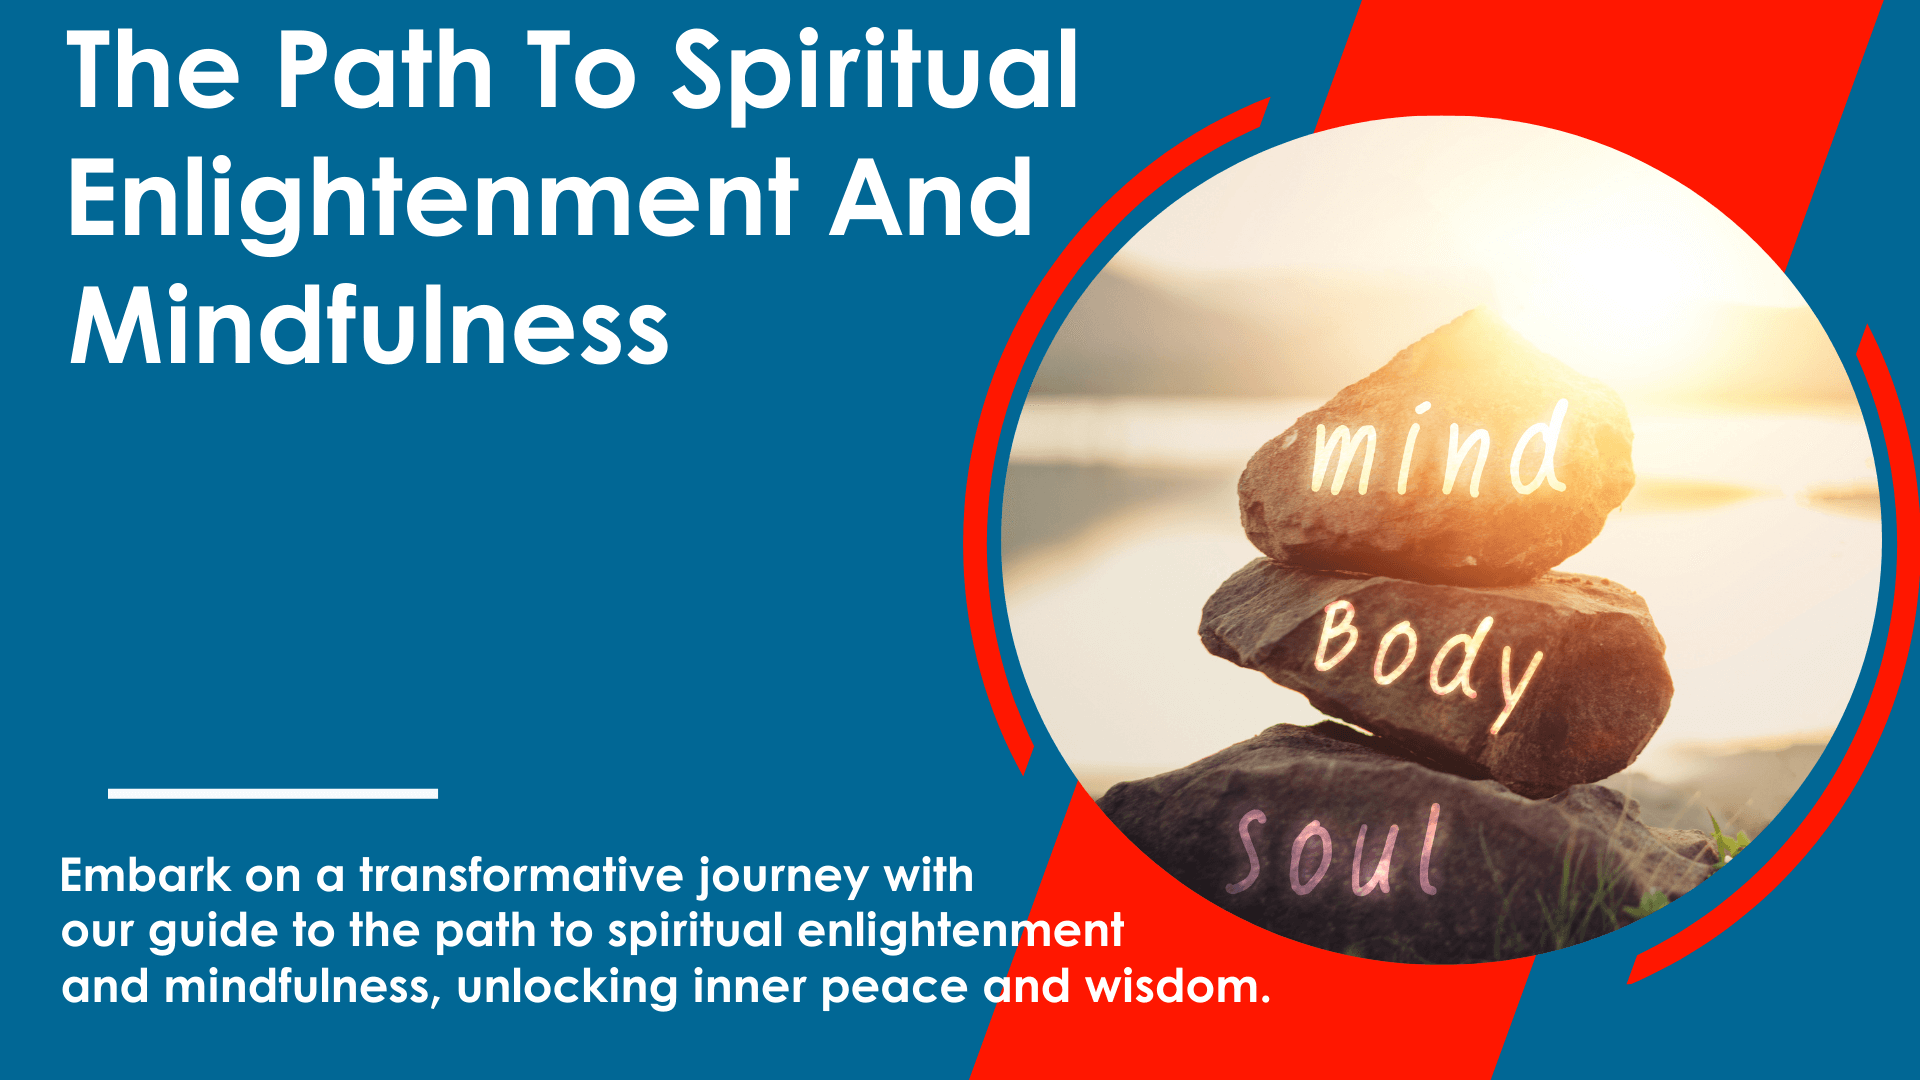 The Path To Spiritual Enlightenment And Mindfulness